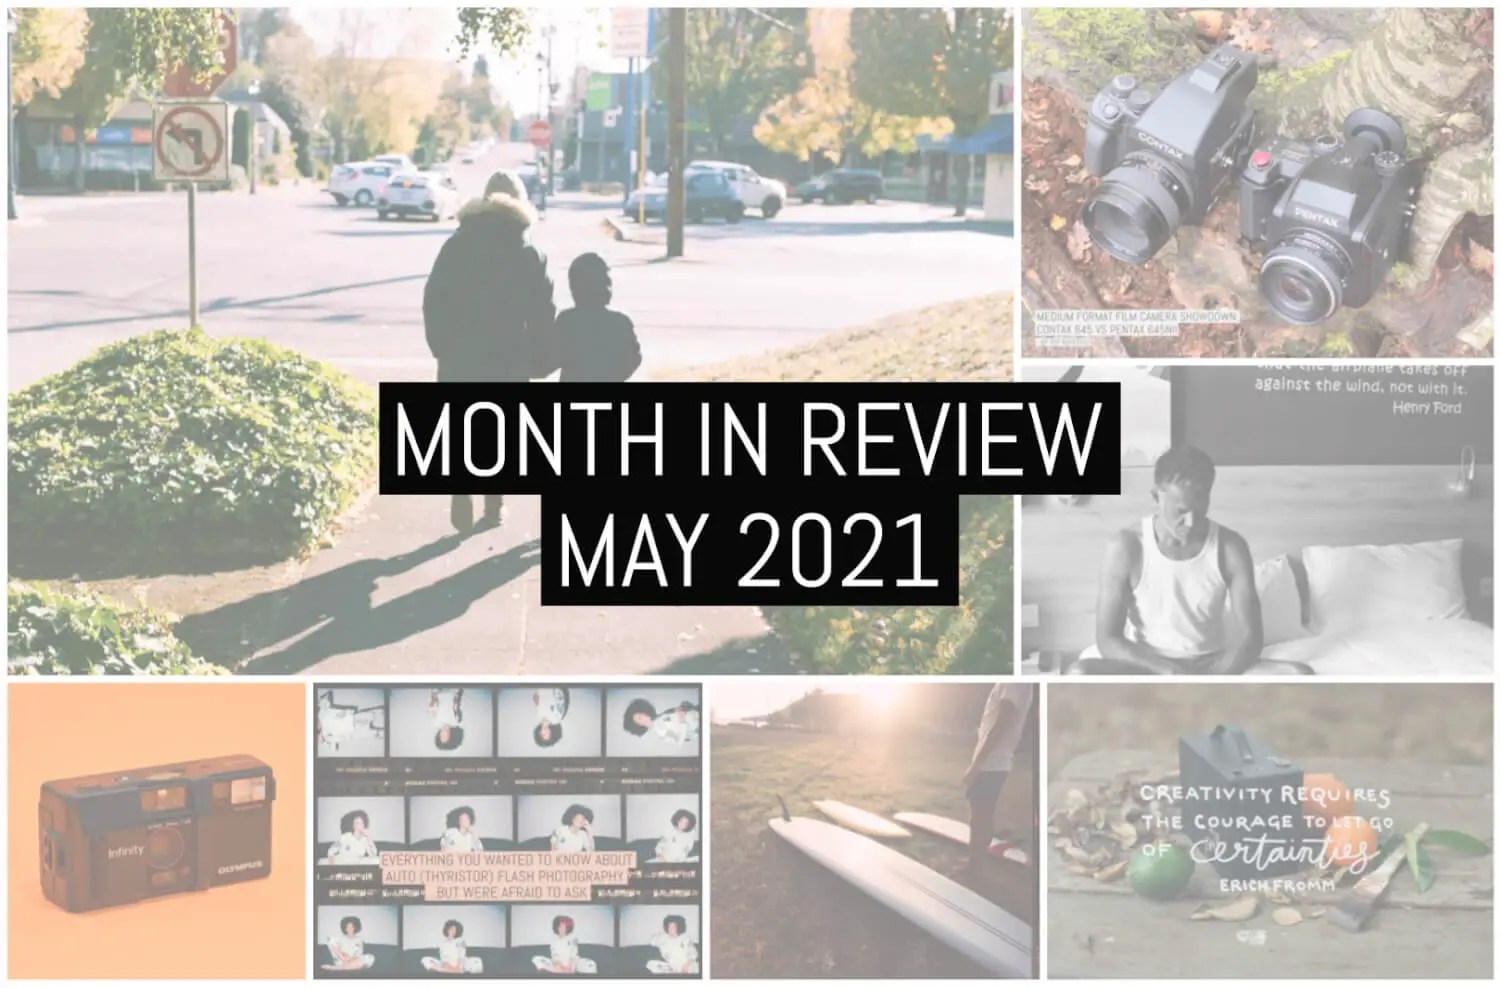 Month in review: May 2021